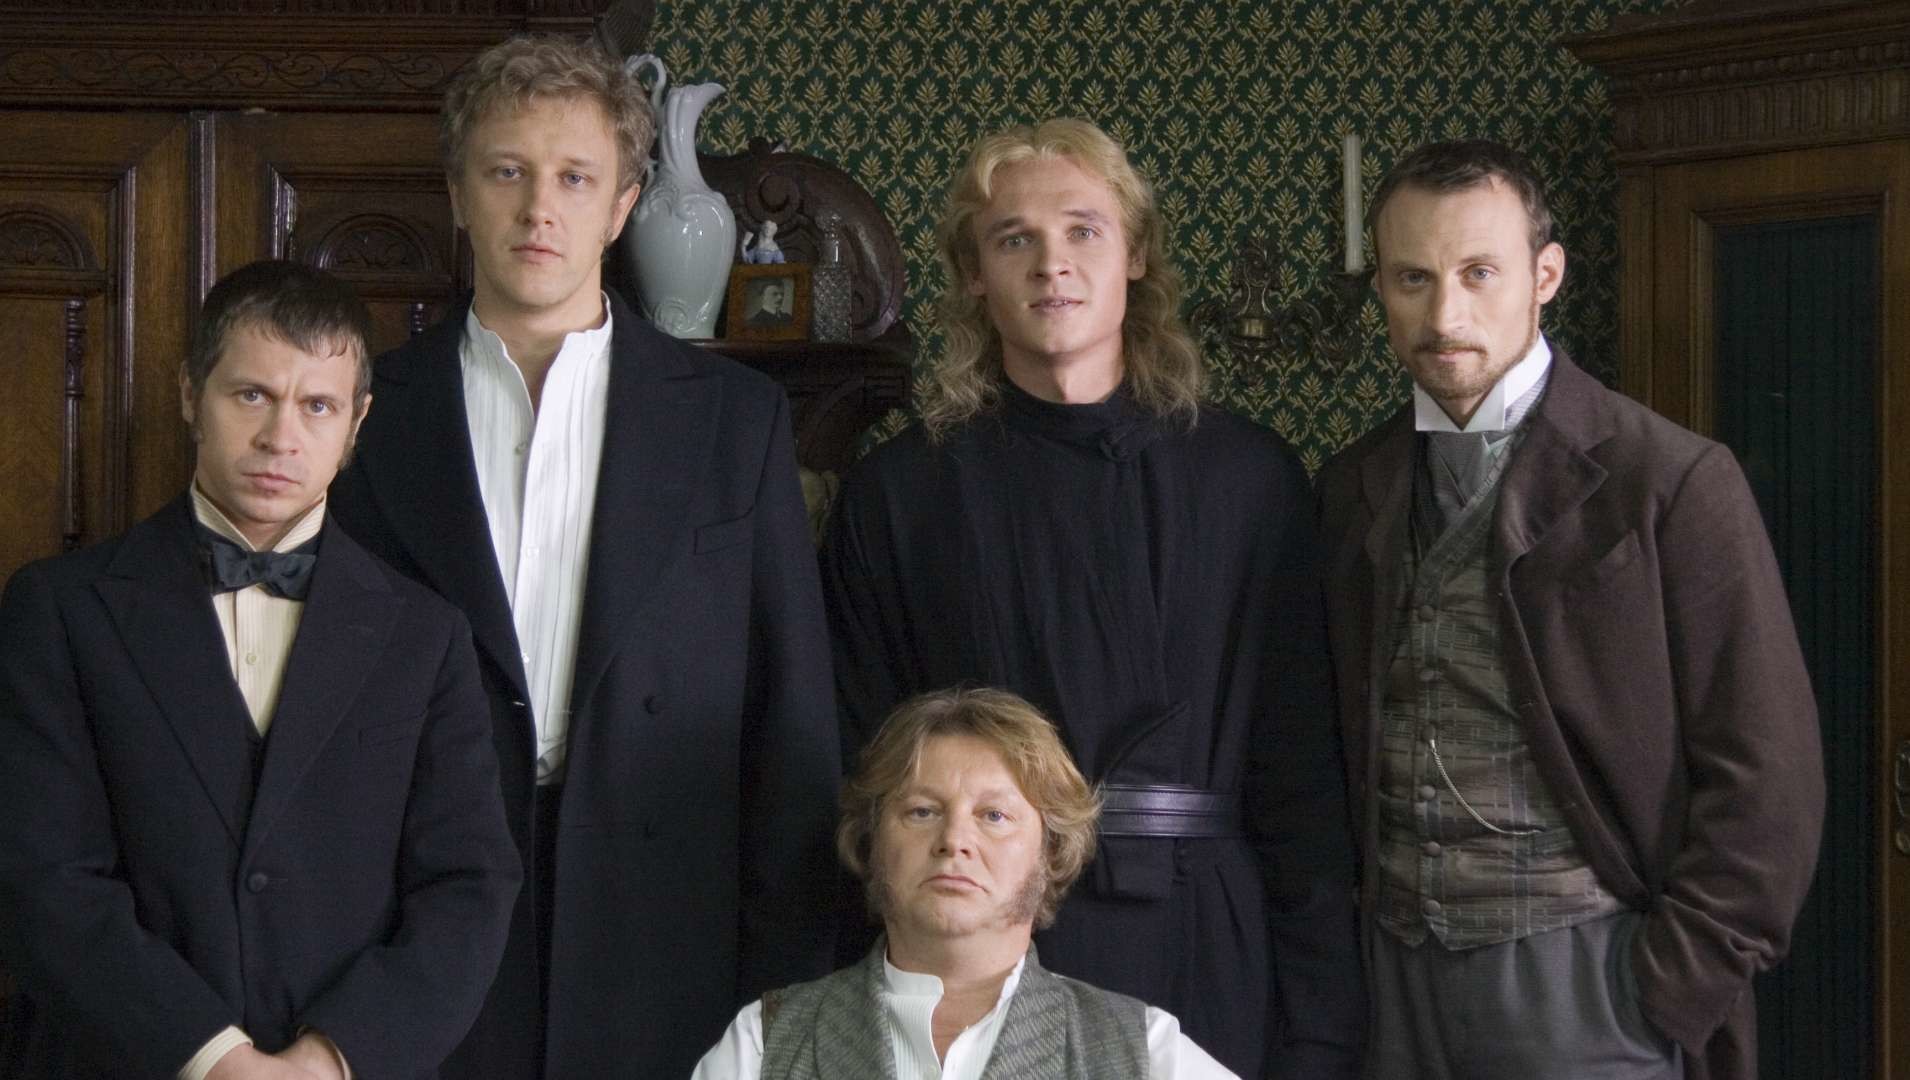 A screenshot from the movie “The Brothers Karamazov,” 2008